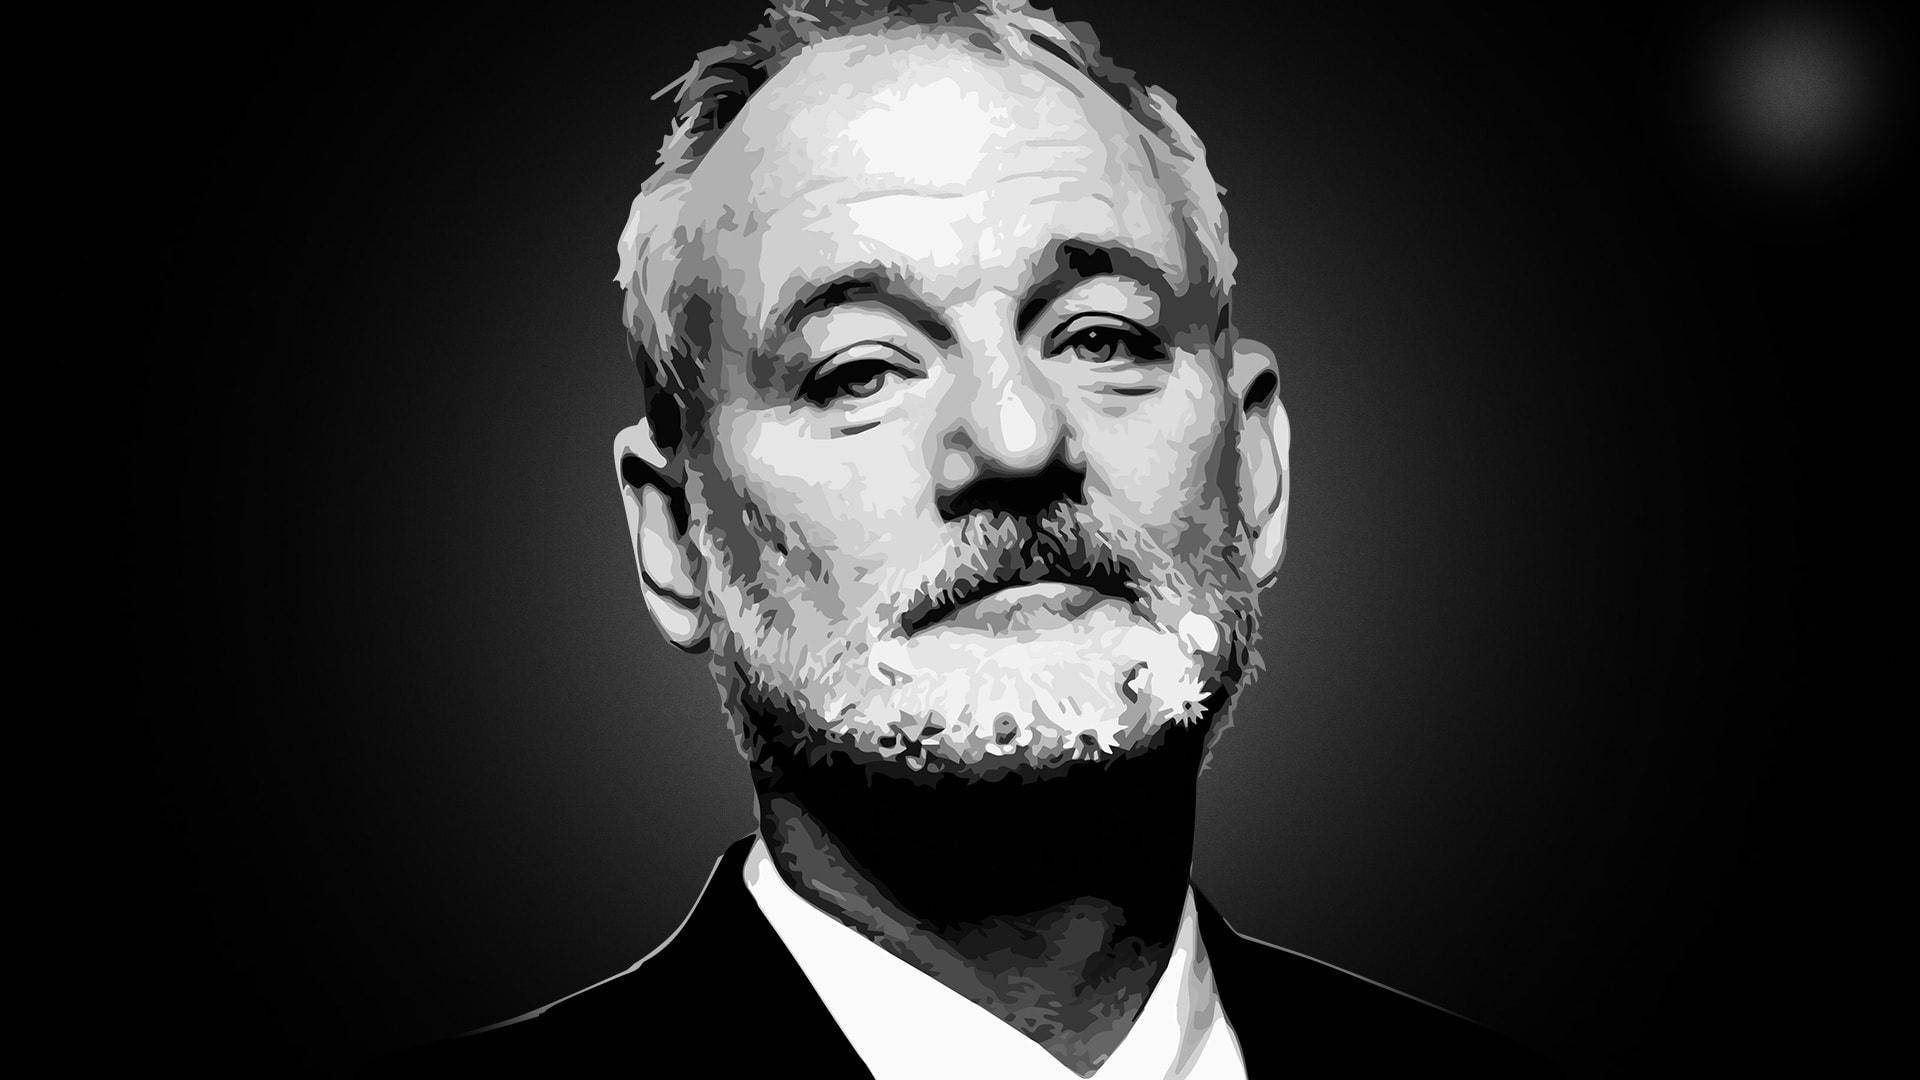 Billmurray, Amerikansk Skådespelare, Svart Och Vit. (note: This Would Be A Very Brief Description For A Computer Or Mobile Wallpaper And May Not Be A Complete Sentence In Swedish.) Wallpaper